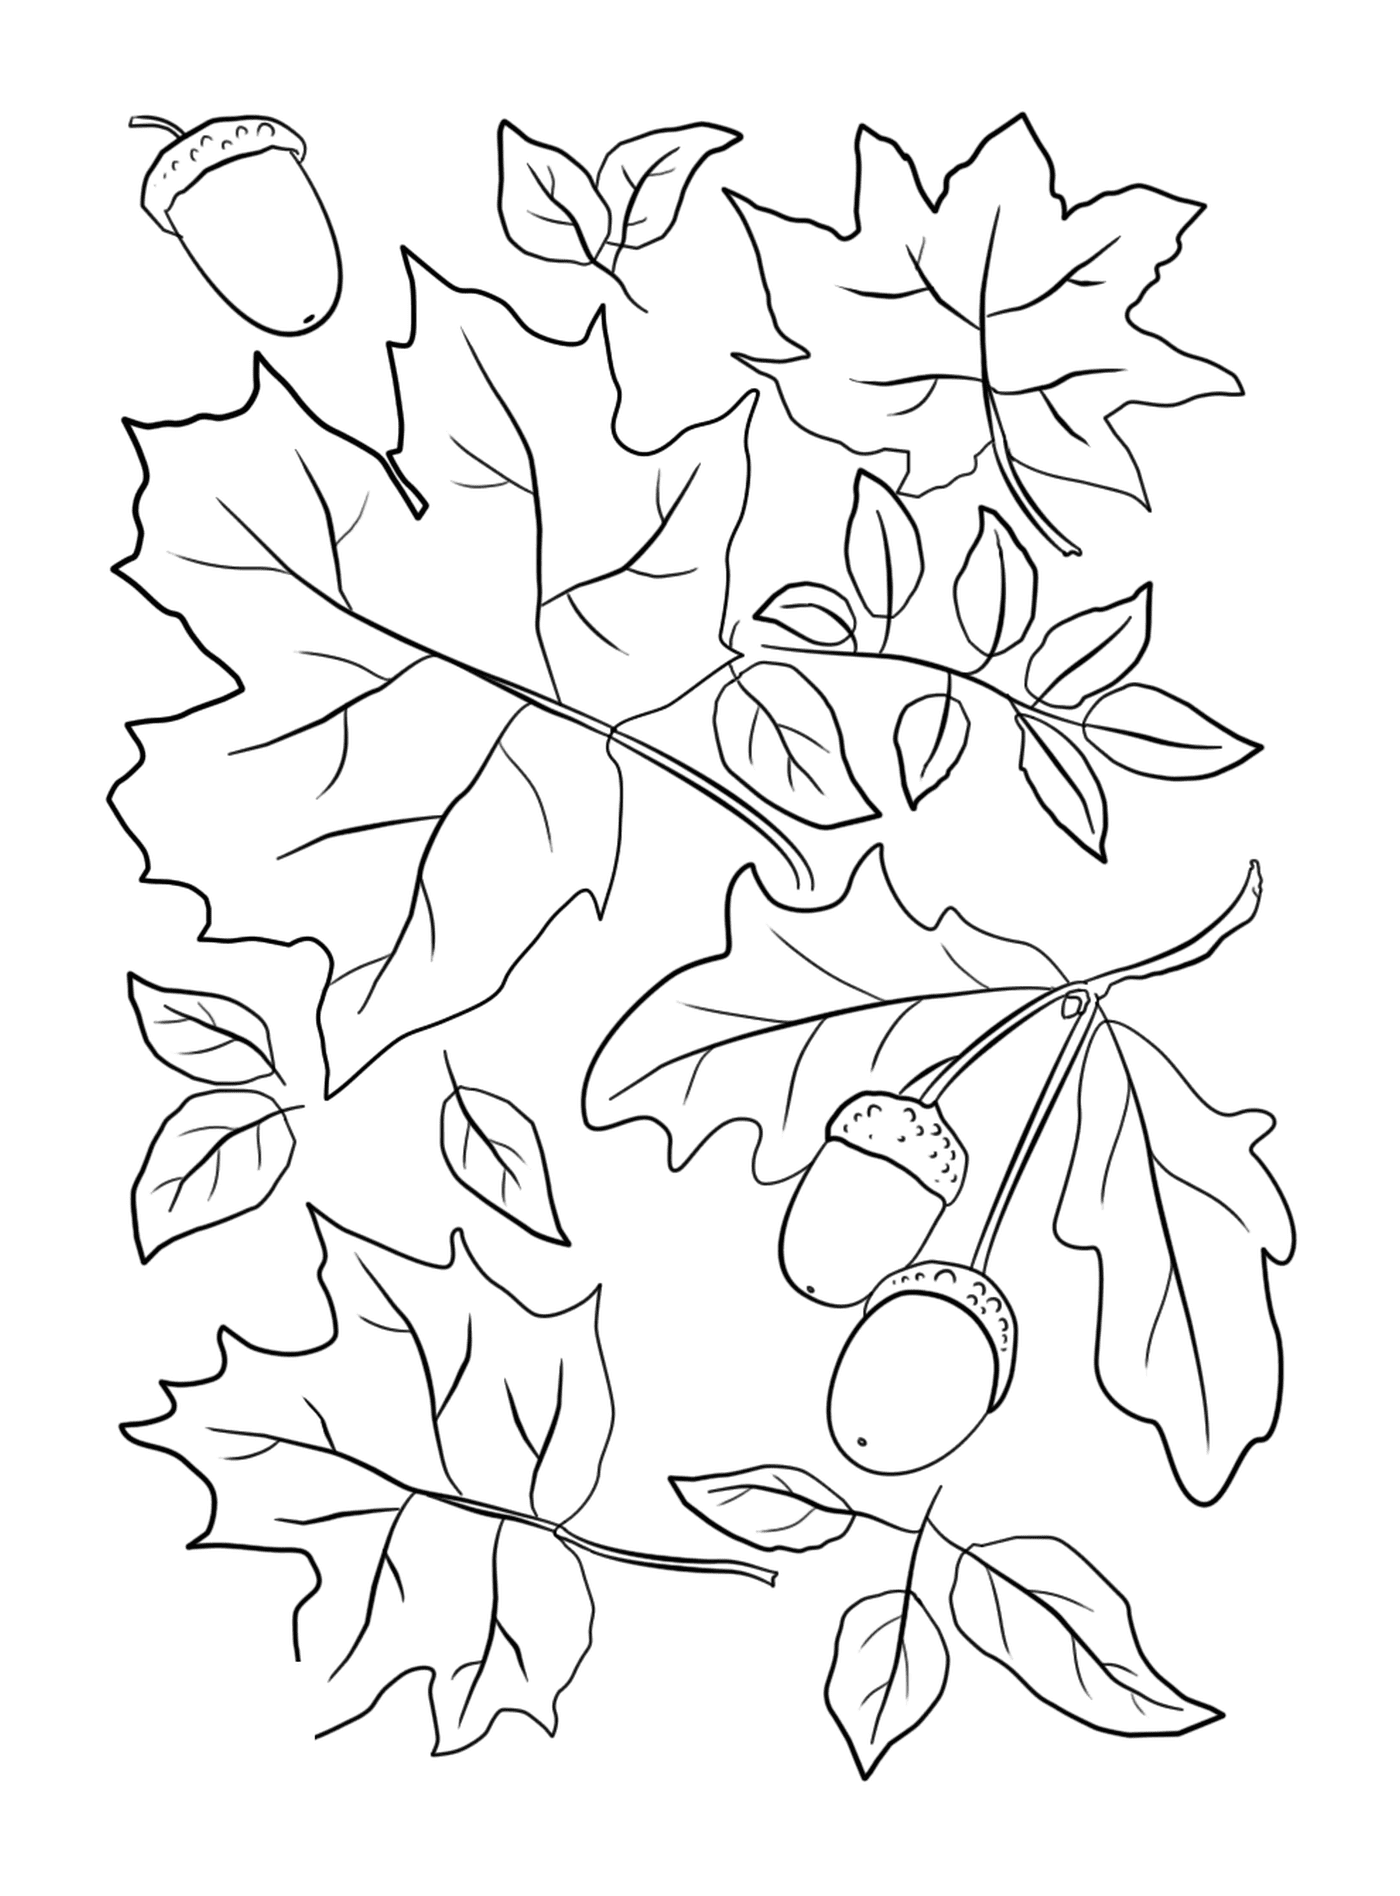  Leaves and acorns on an autumn tree 